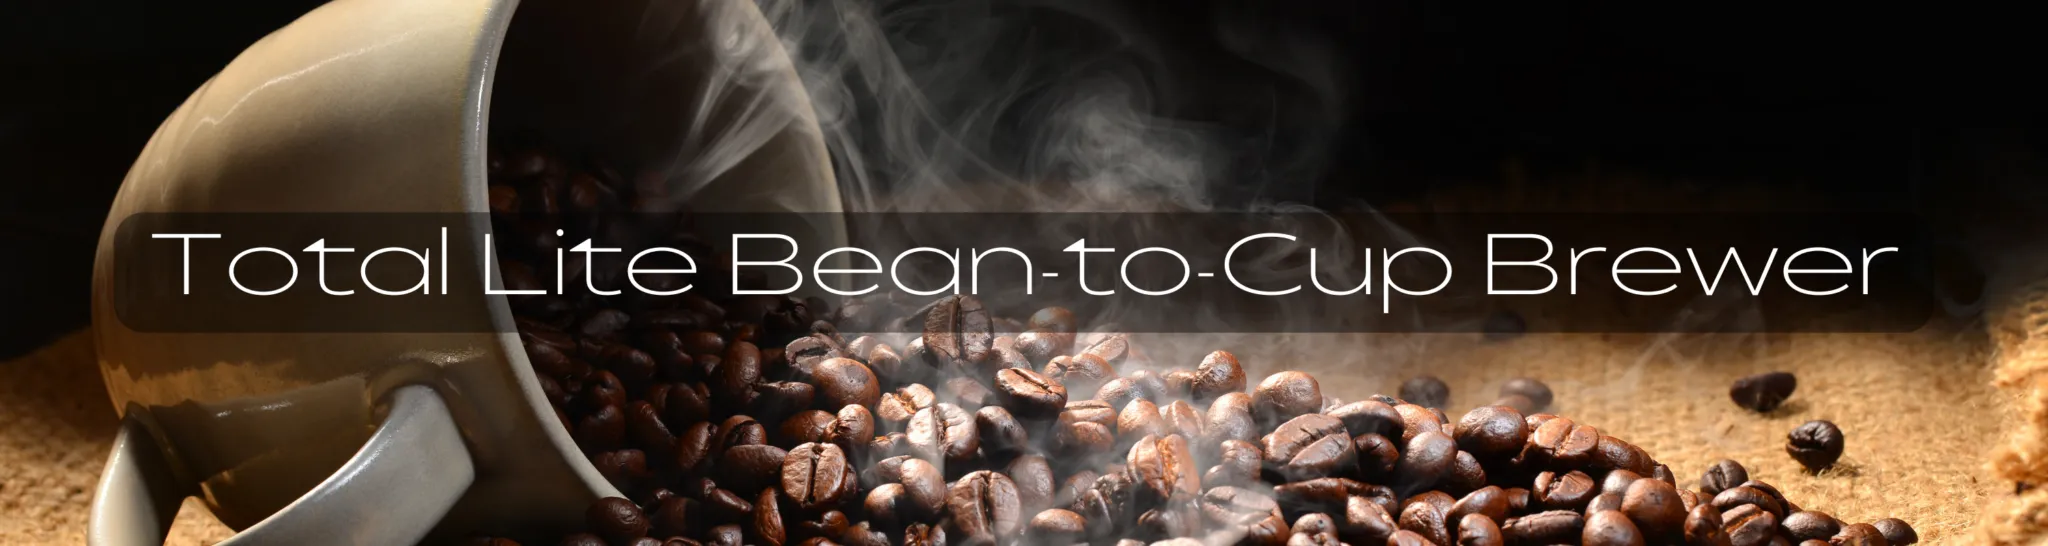 Total-Lite-Bean-to-Cup-Brewer-Banner-2048x546